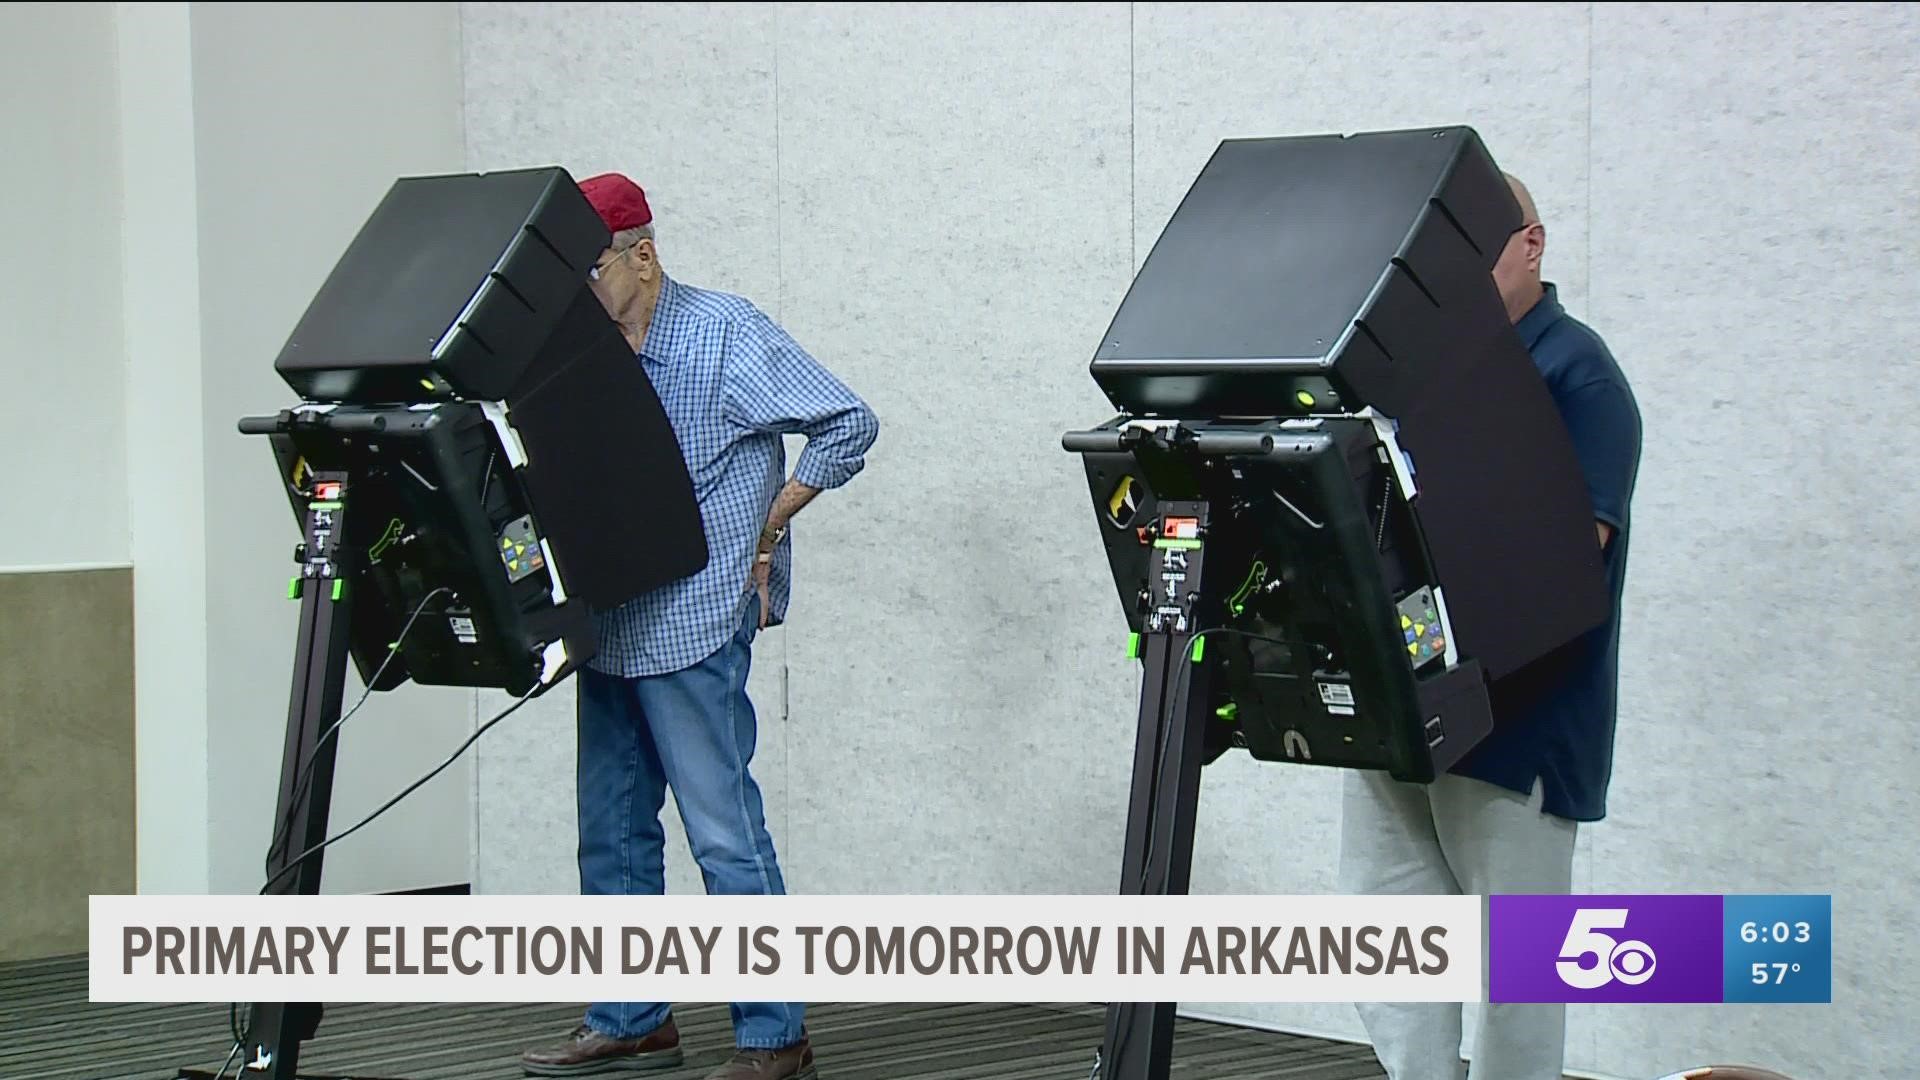 Polls are open on Election Day in Arkansas from 7:30 a.m. to 7:30 p.m.